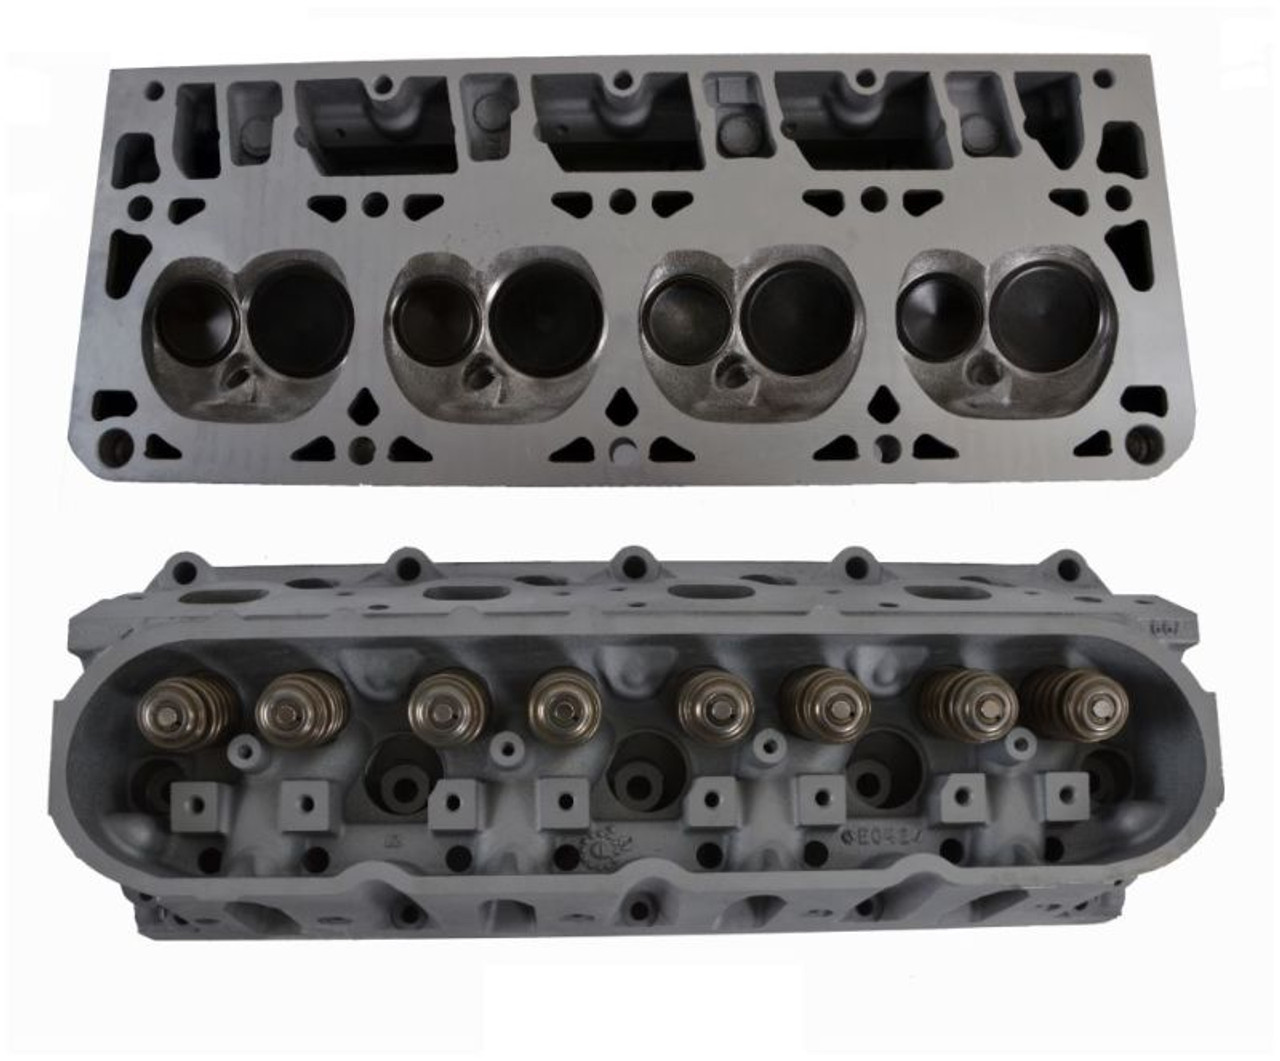 2004 Cadillac CTS 5.7L Engine Cylinder Head Assembly CH1060R -11